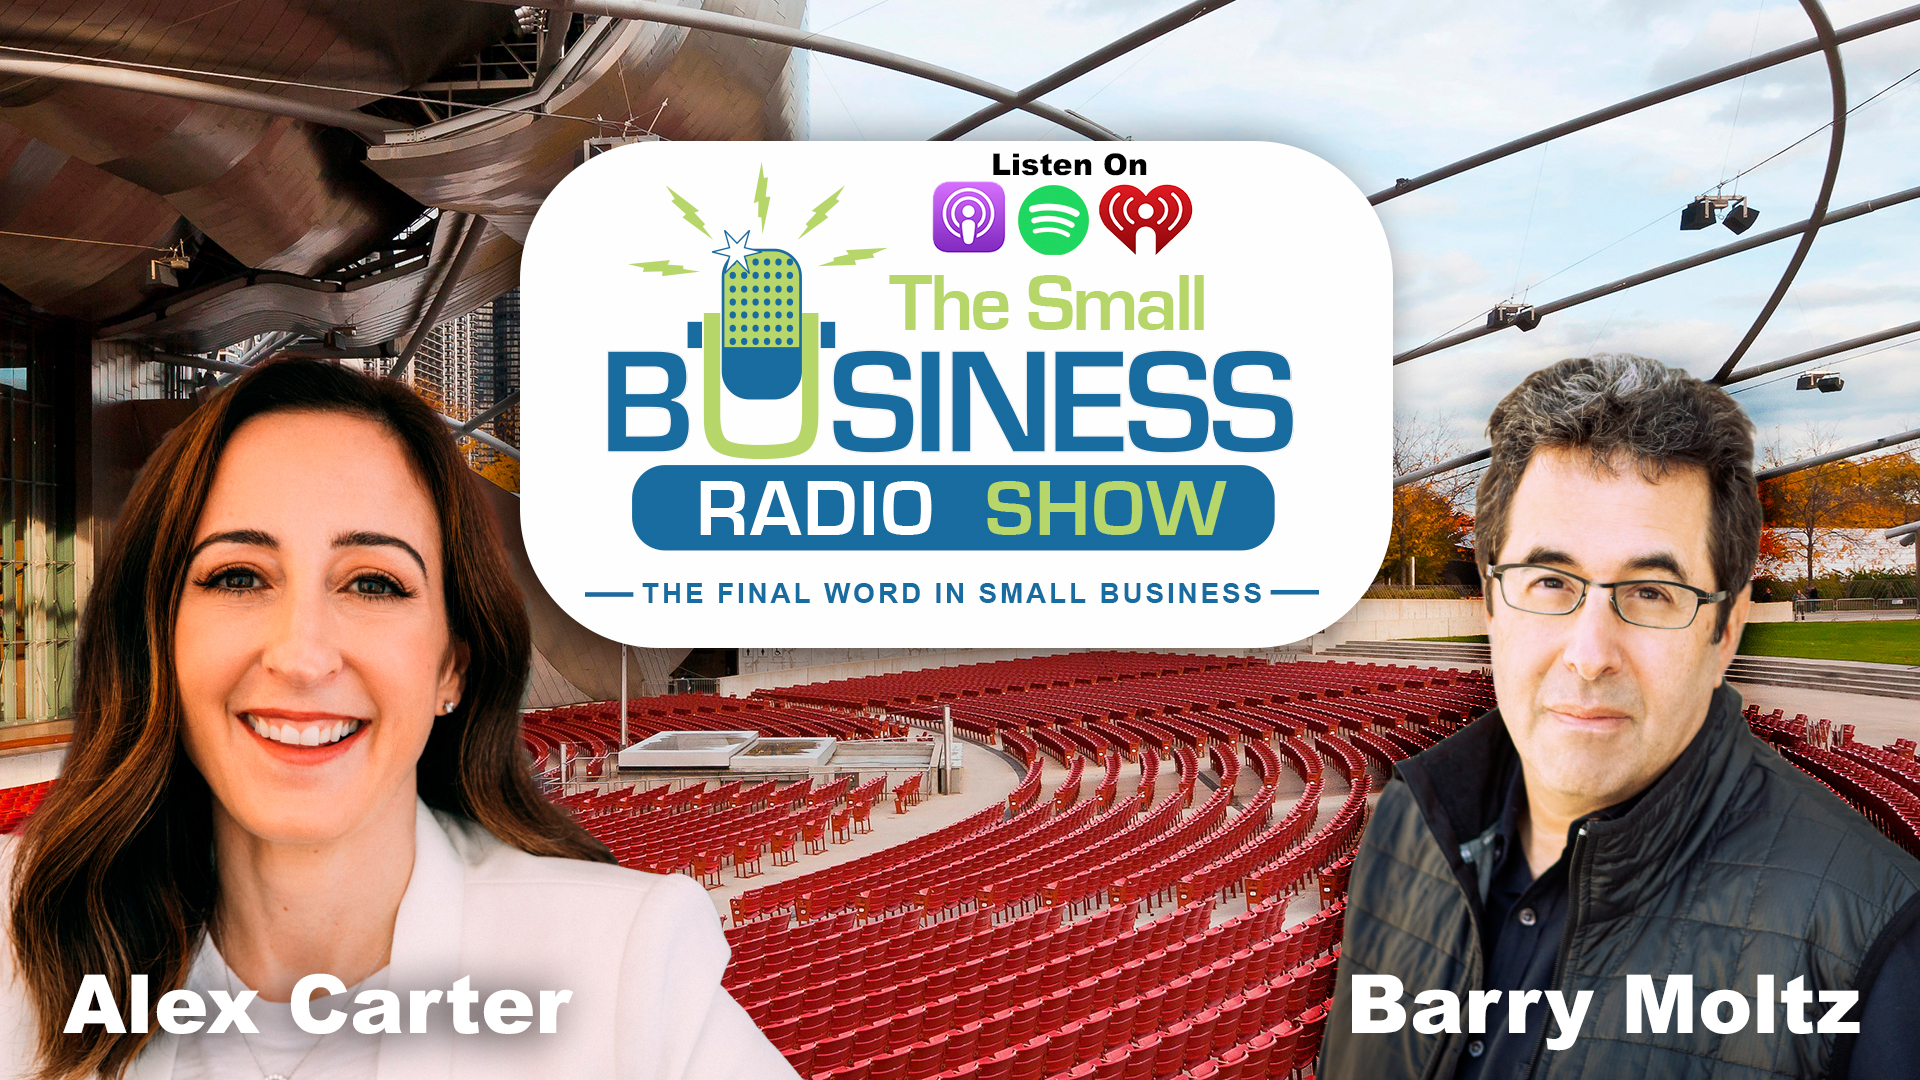 Alex Carter on The Small Business Radio Show